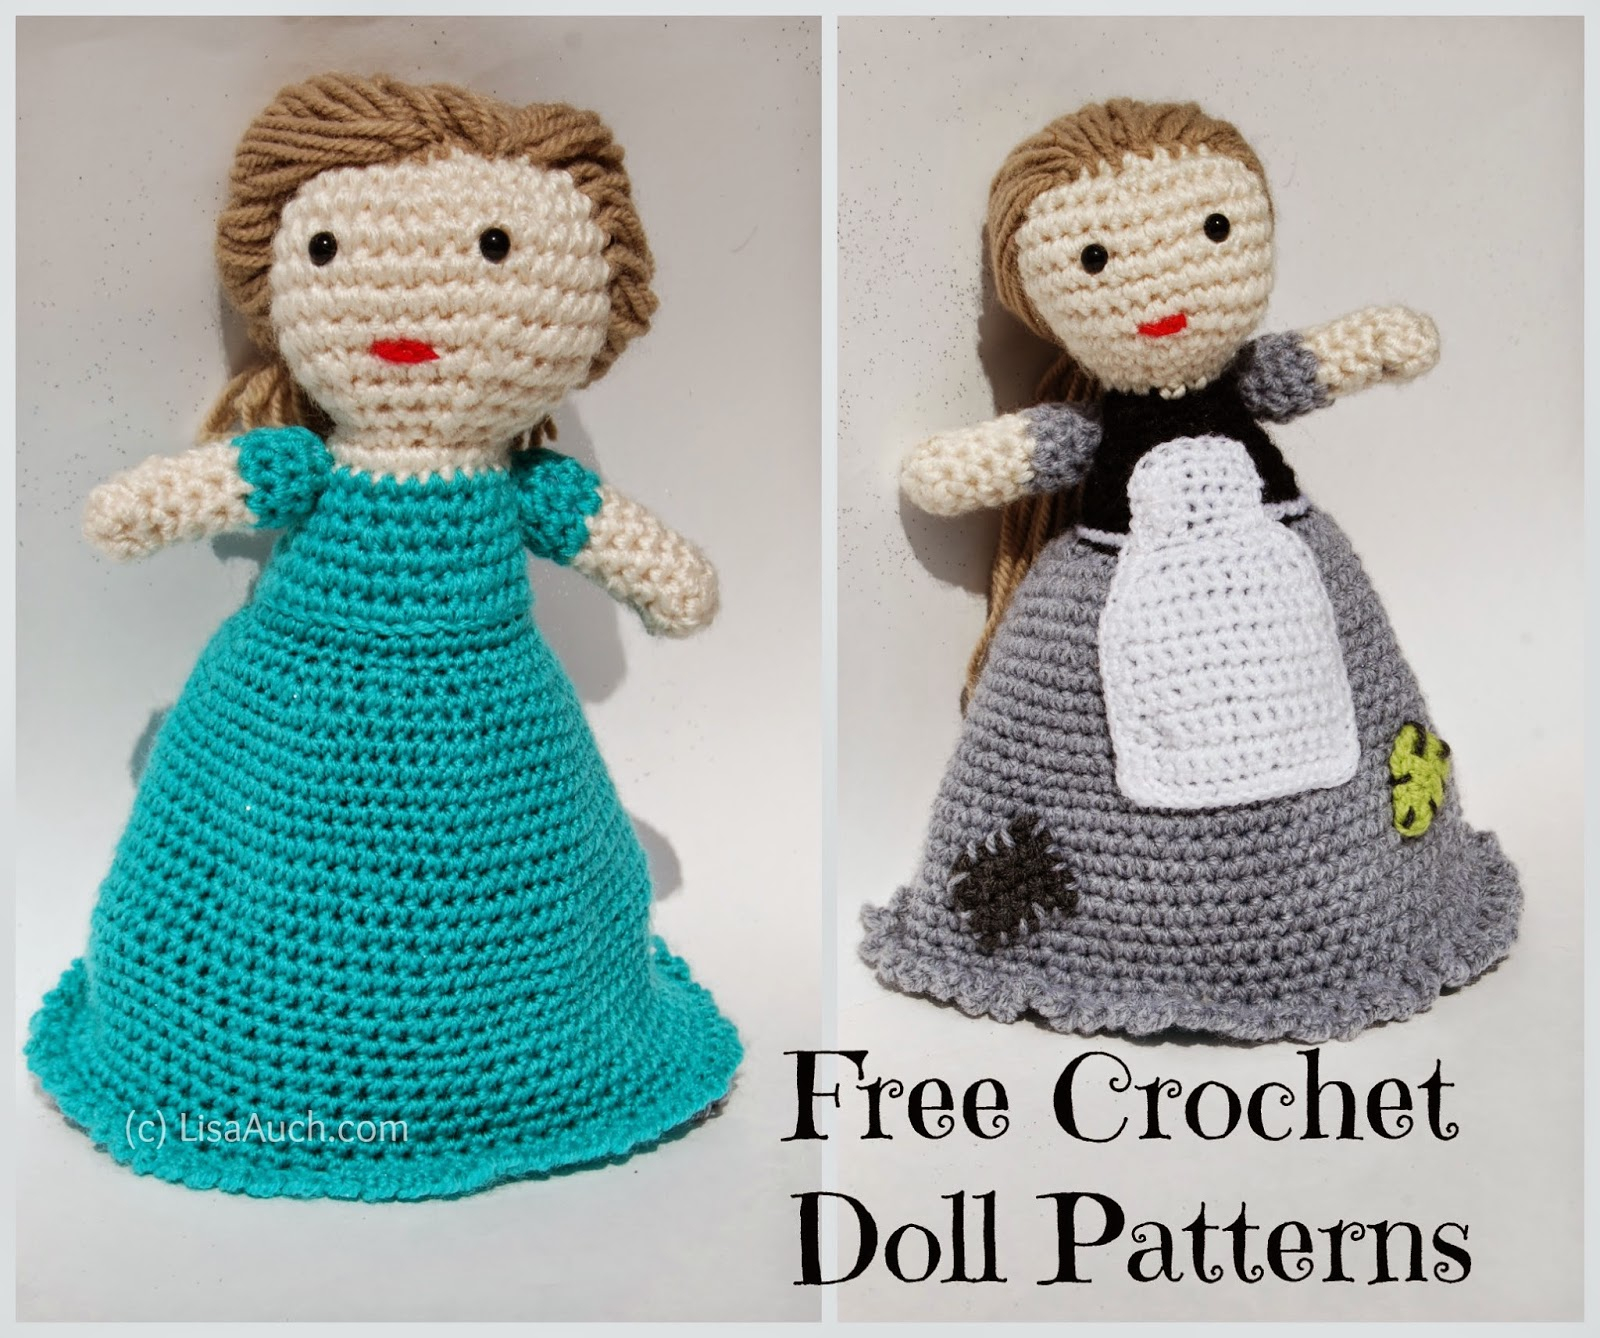 Simple Crochet Doll Pattern Free Crochet Patterns And Designs Lisaauch Free Crochet